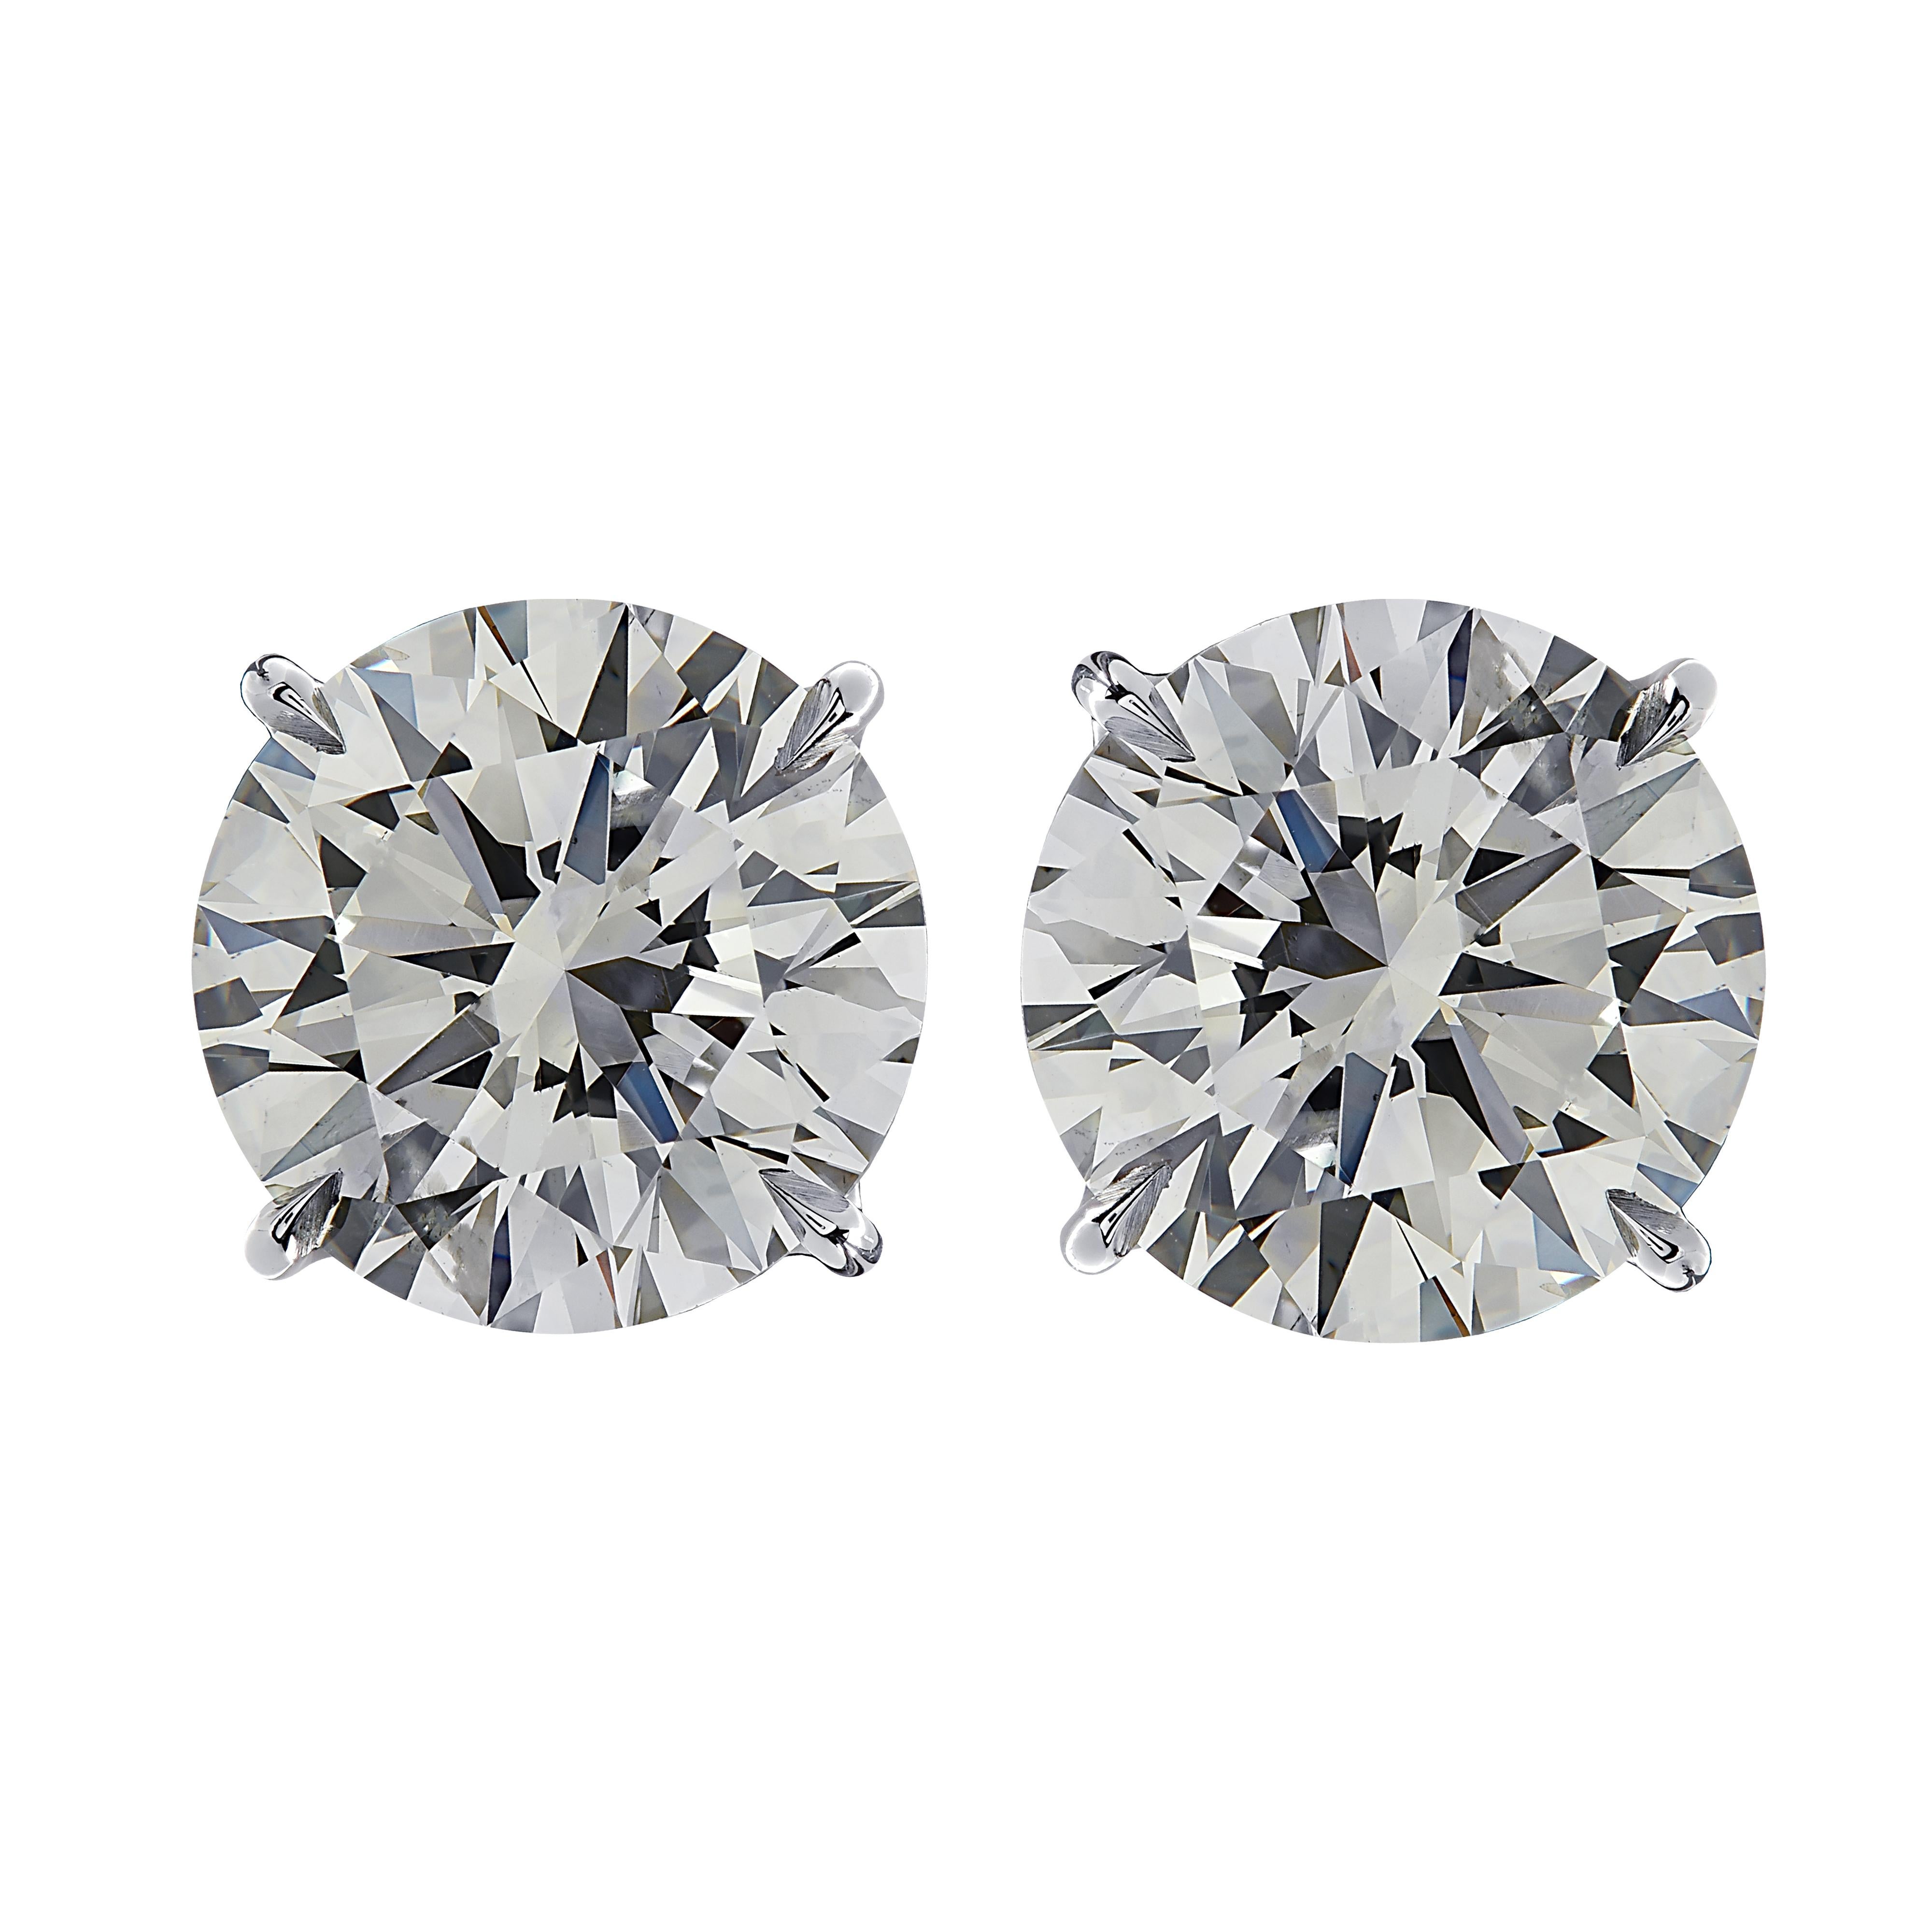 Vivid Diamonds GIA Certified 7.01 Carat Diamond Solitaire Stud Earrings In New Condition For Sale In Miami, FL